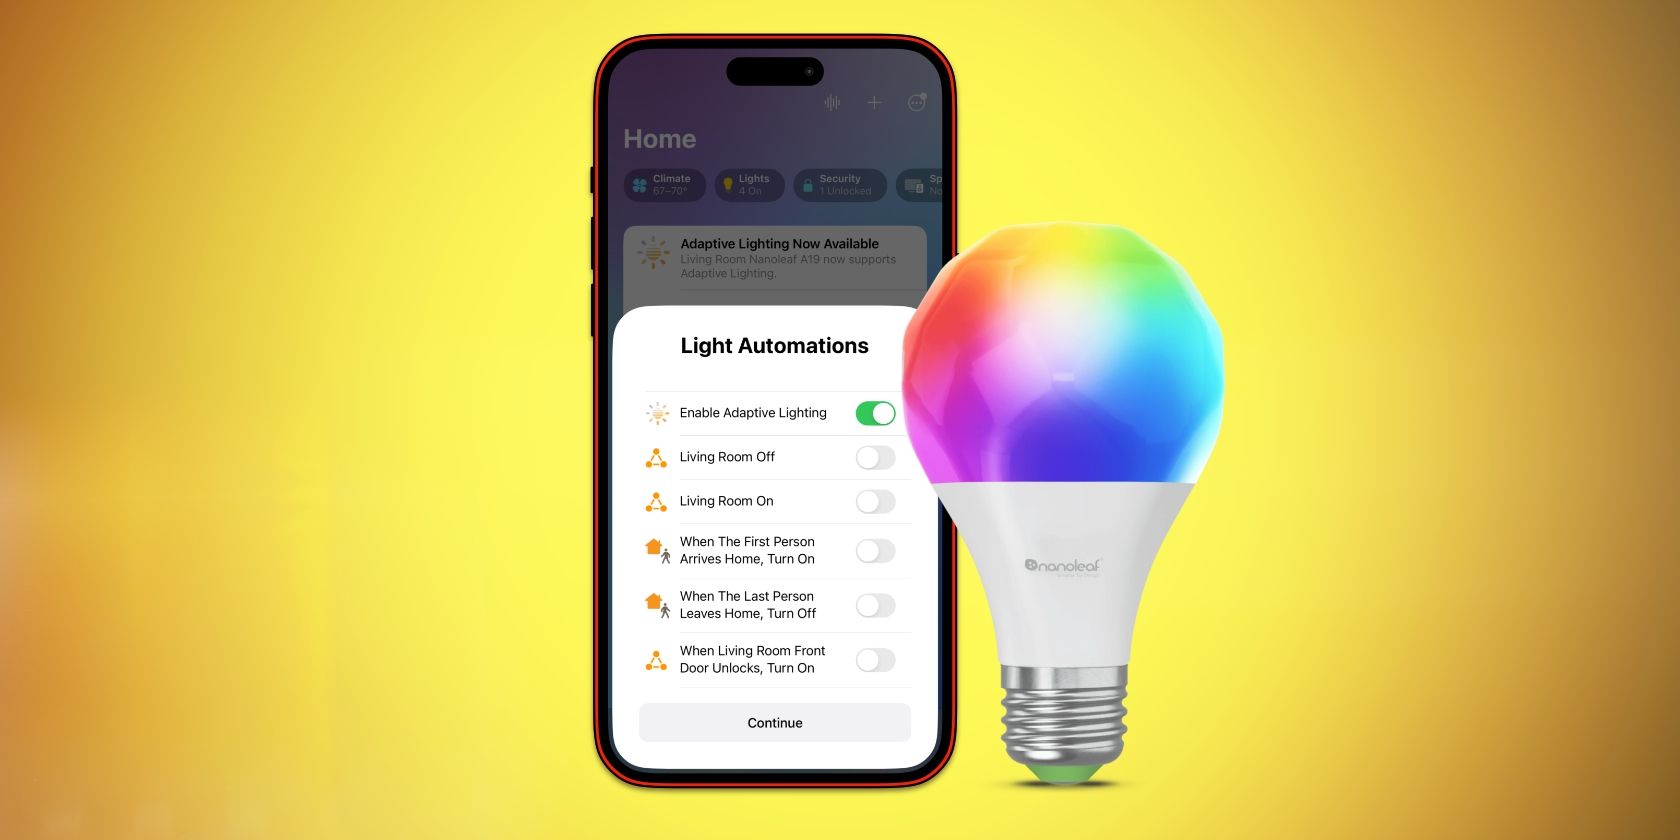 HomeKit Adaptive Lighting setup flow displayed on an iPhone with a Nanoleaf light bulb in front